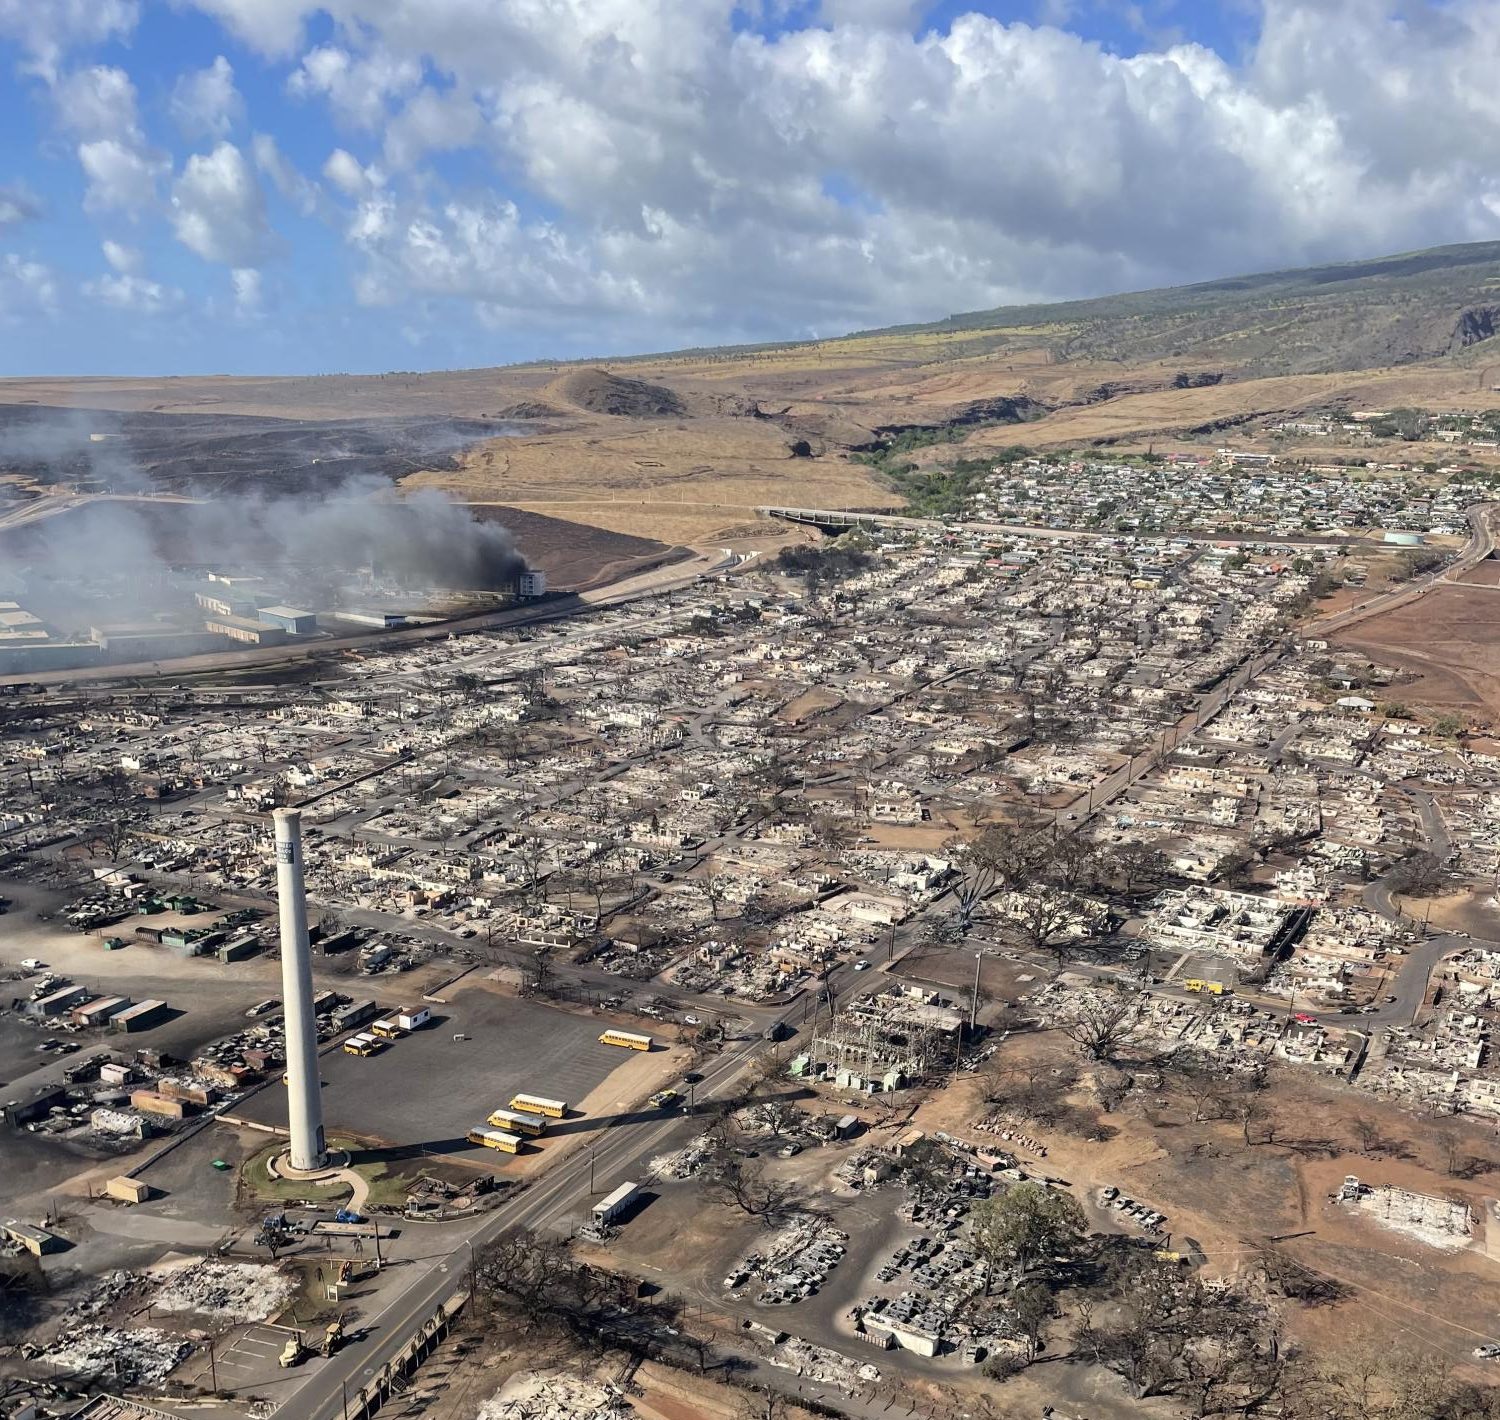 A photo taken on Aug. 9, one day after the fires sparked and caused insurmountable damage. Areas of Lahaina are still smoking as the fire continues to smolder.